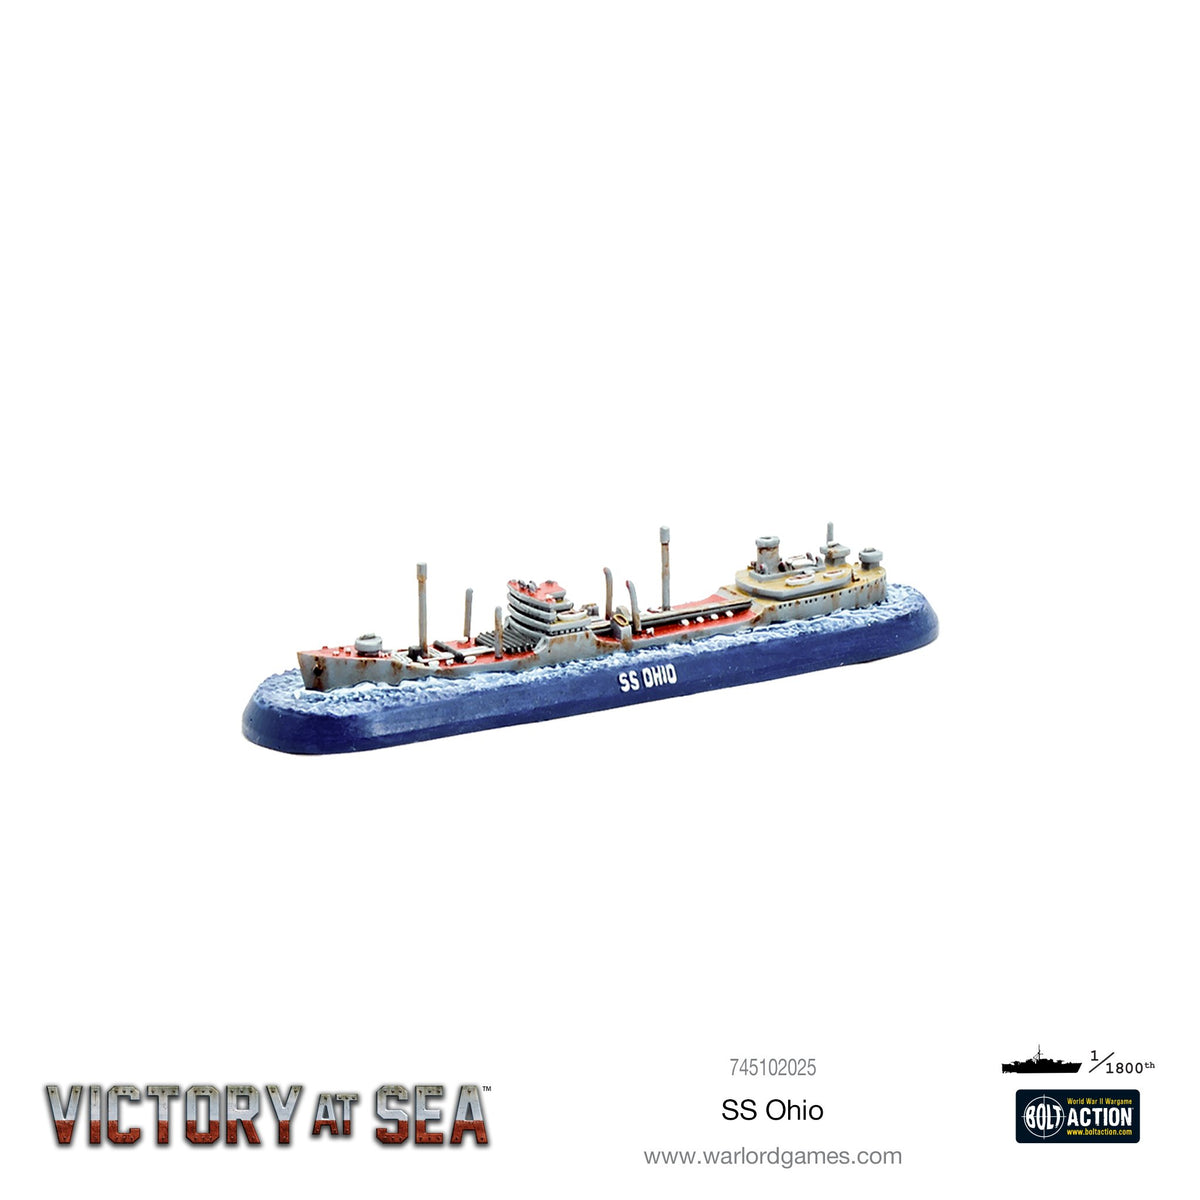 Victory at Sea: SS Ohio tanker